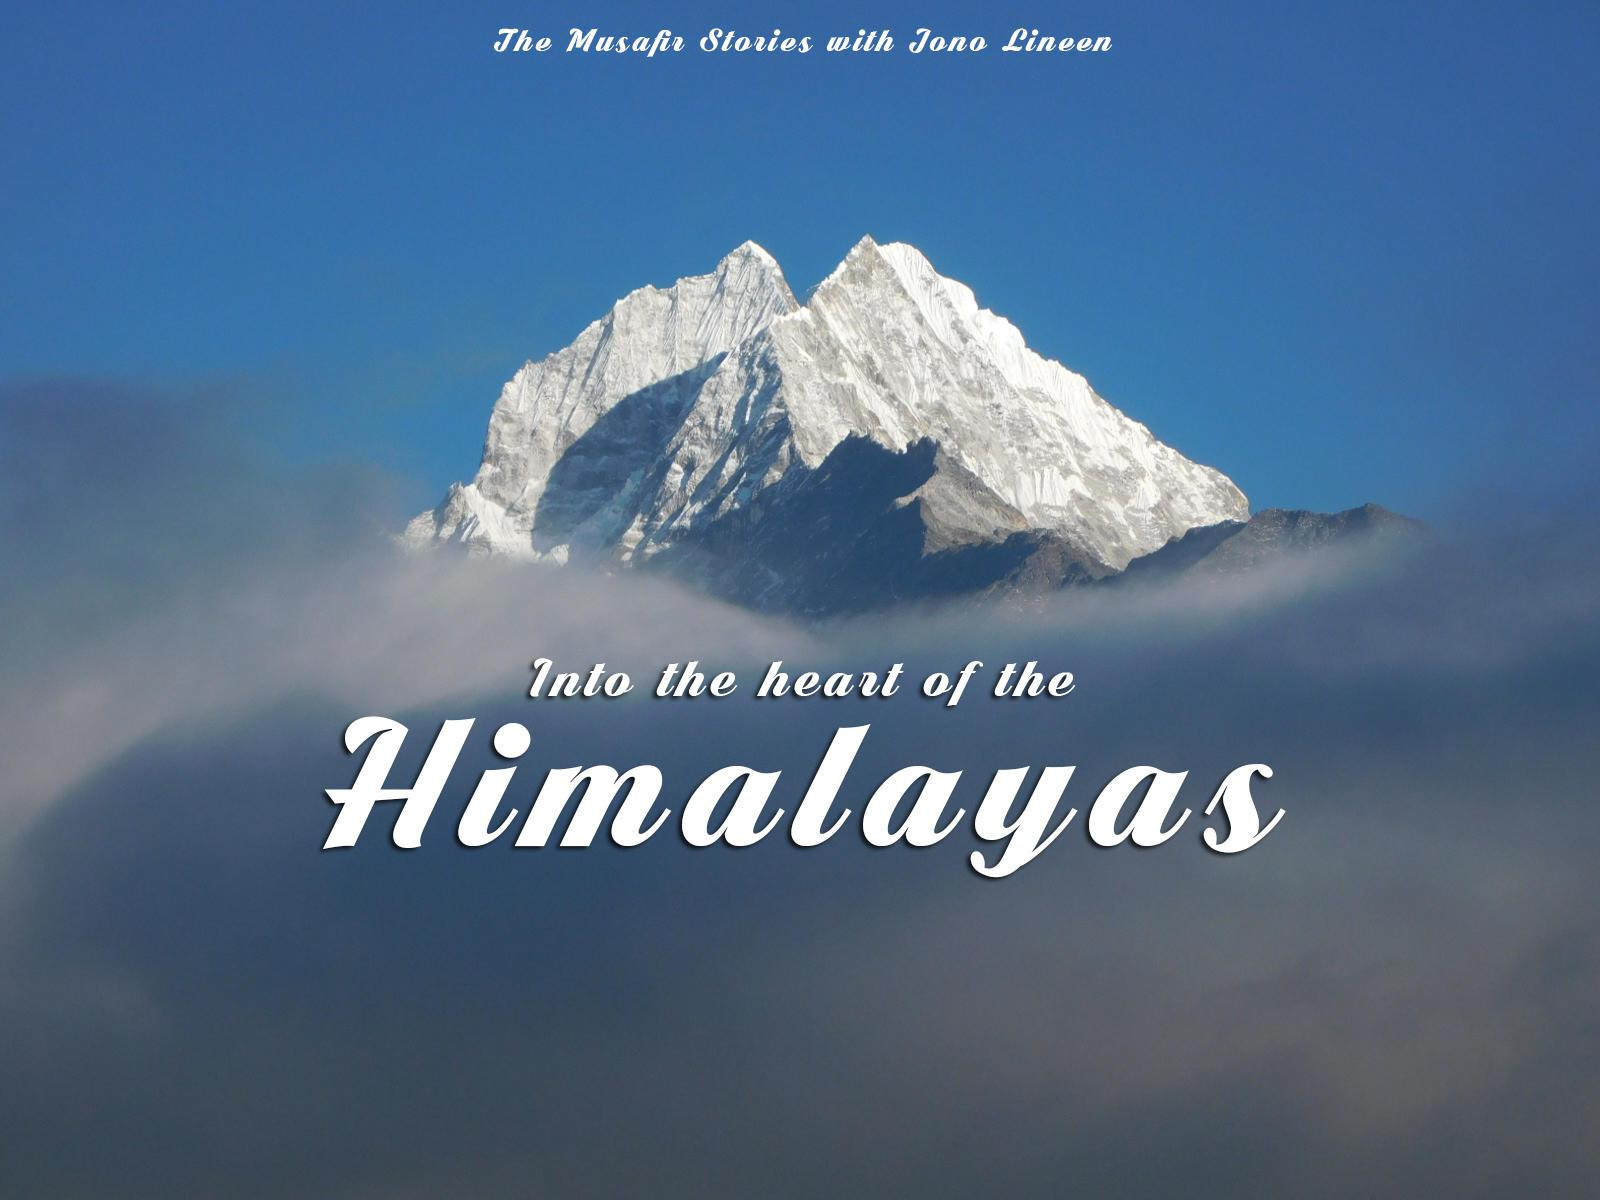 95: Into the heart of the Himalayas with Jono Lineen